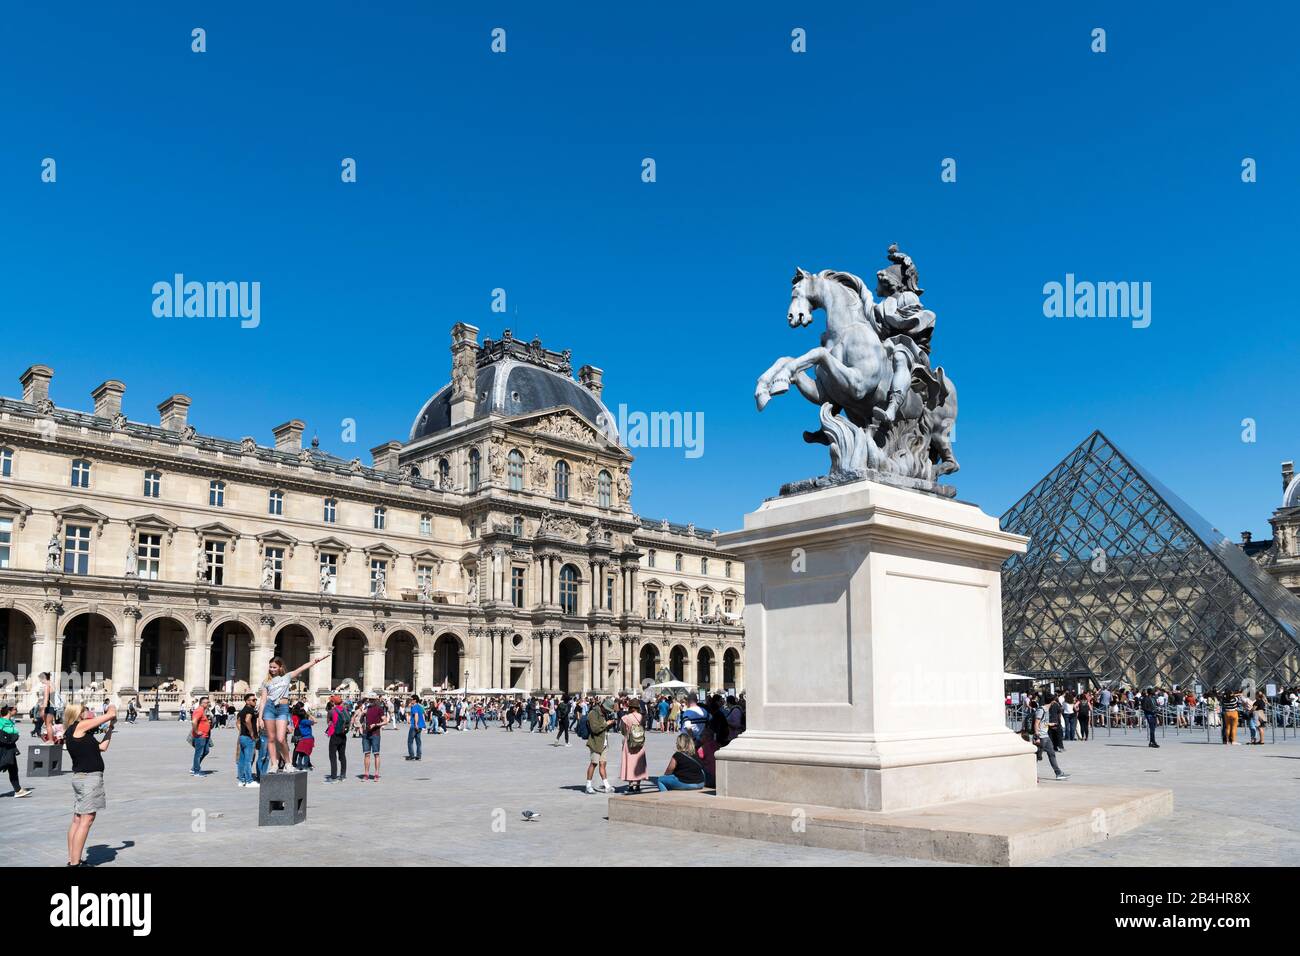 Tourists in front of the Musee du Louvre, the glass pyramid and the equestrian statue of King Louis XIV, Paris, France, Europe Stock Photo